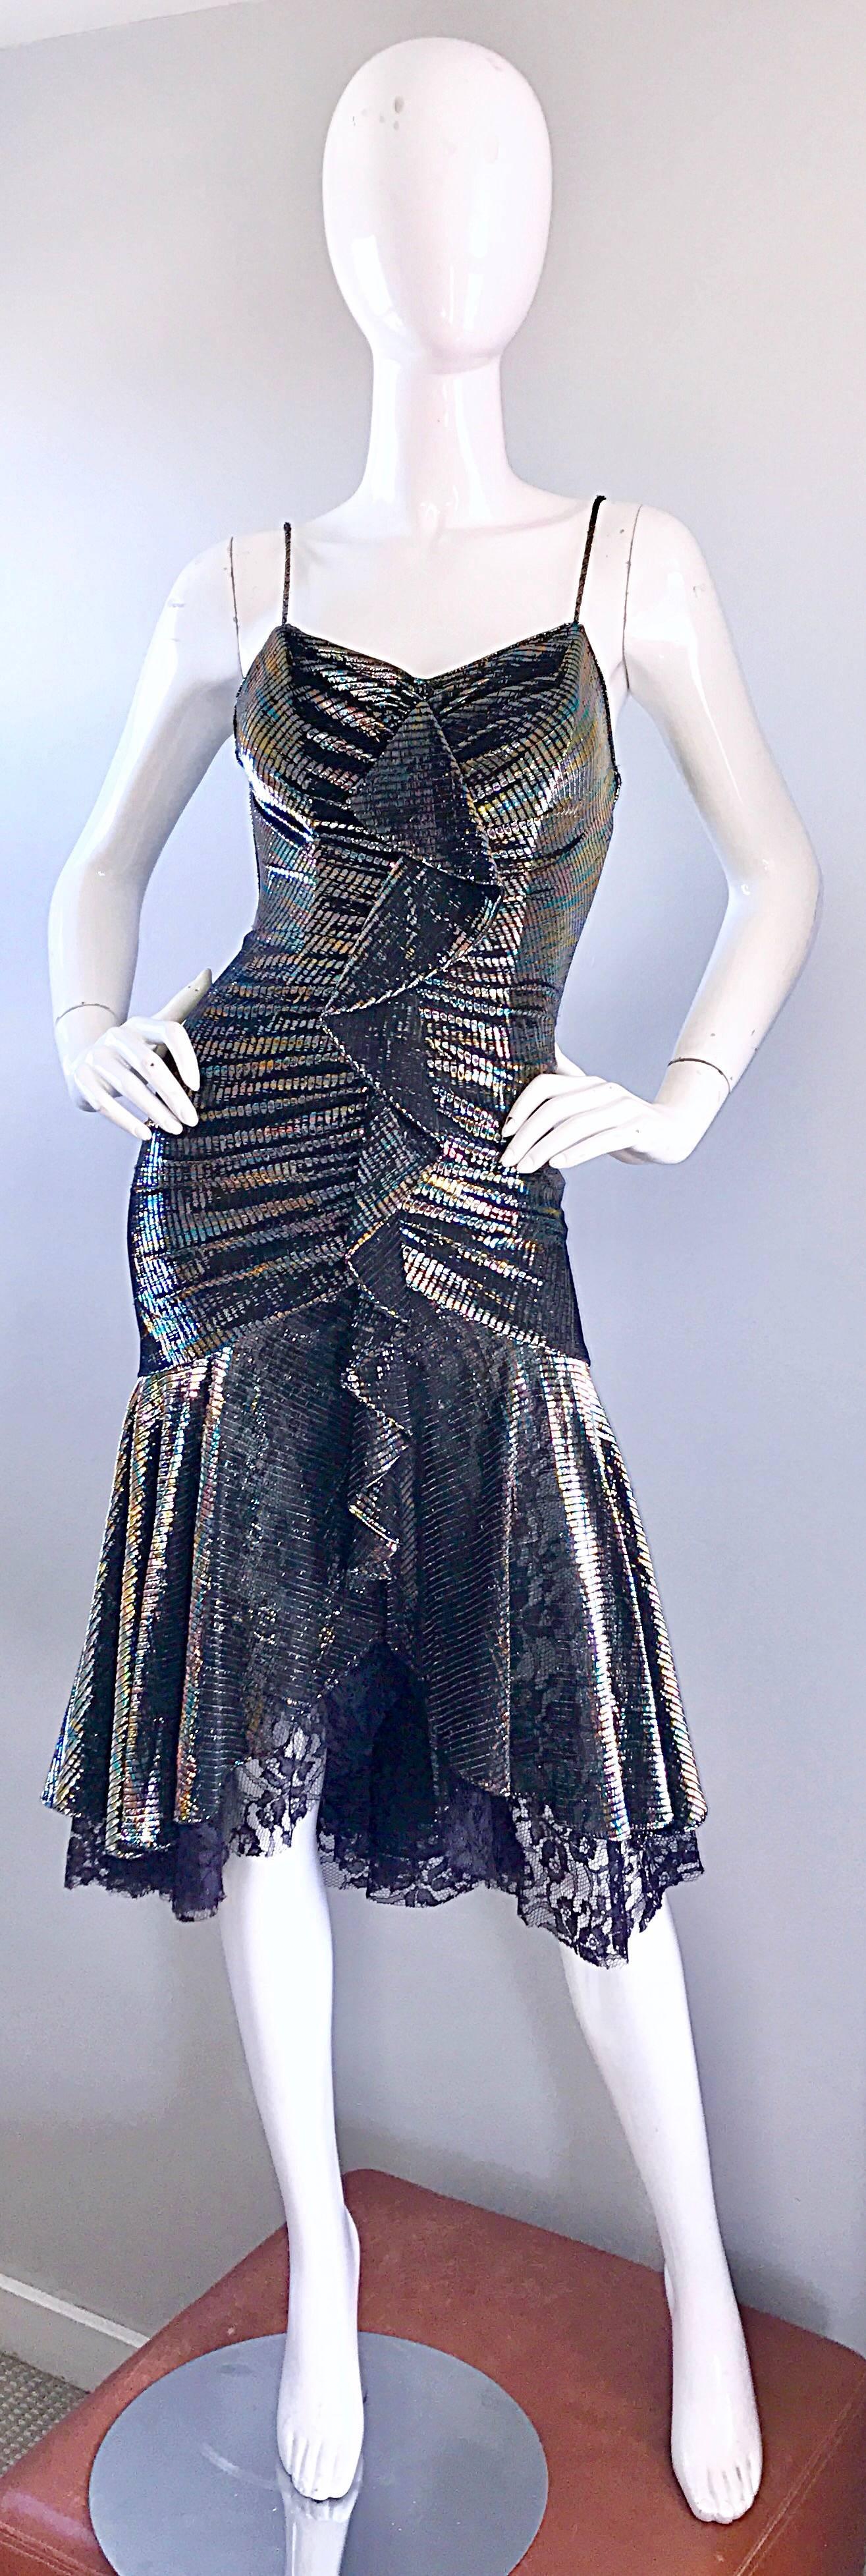 Amazing late 1970s SAMIR Studio 54 rainbow metallic disco dress! Features flattering ruched detail, with an origami ruffle detail up the front center. Asymmetrical handkerchief hem with black lace that peeps through. Boned bodice keeps everything in